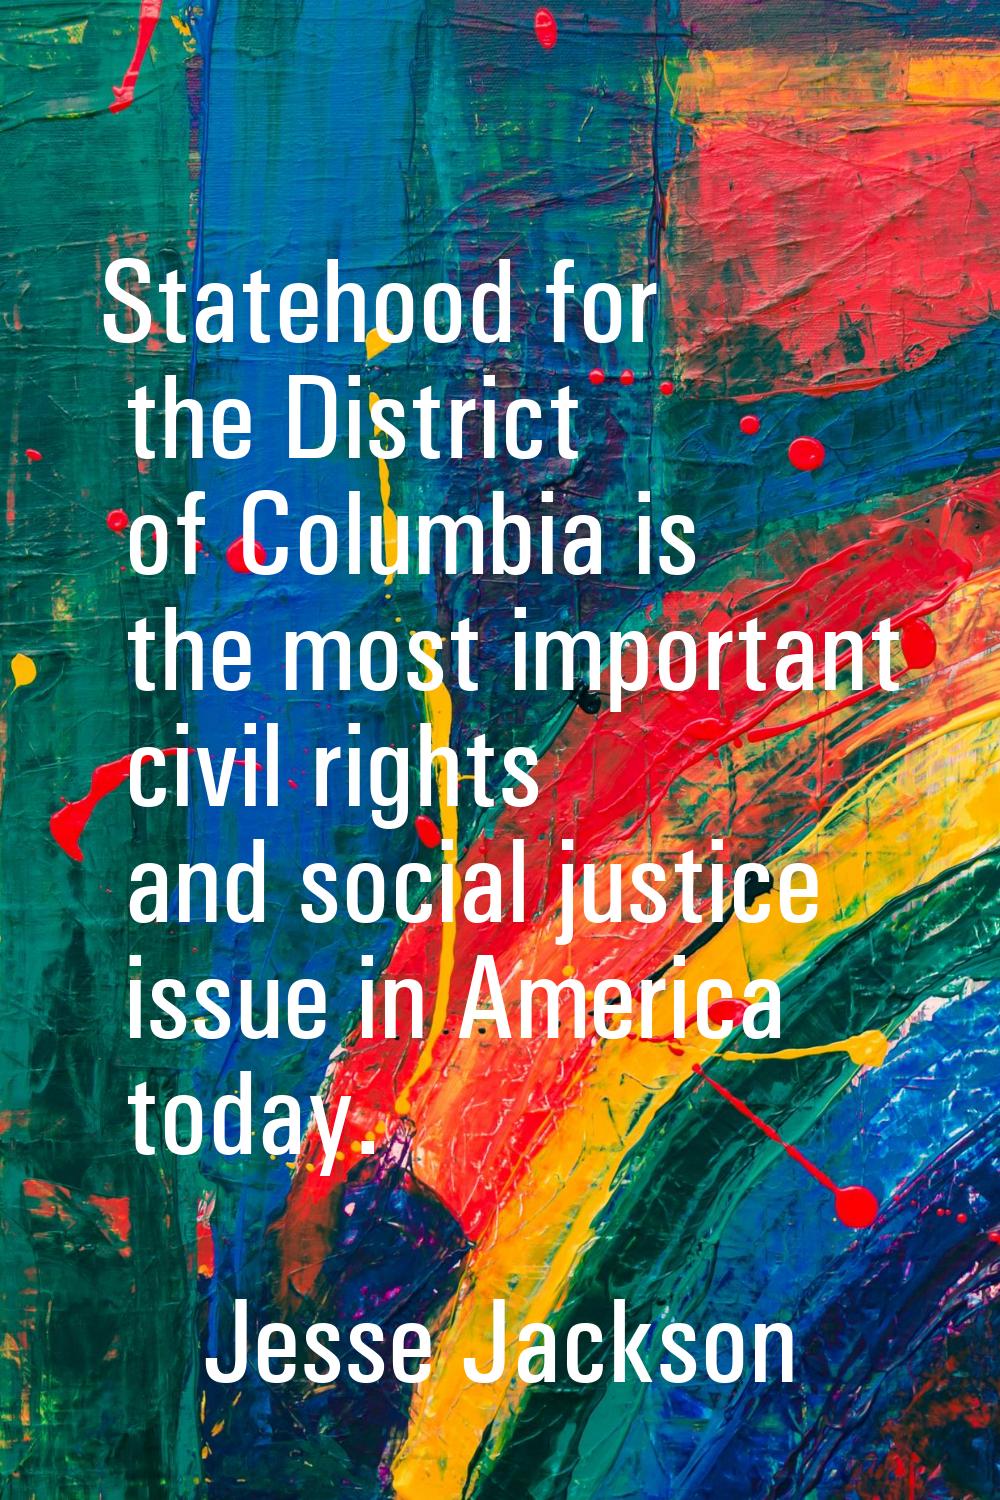 Statehood for the District of Columbia is the most important civil rights and social justice issue 